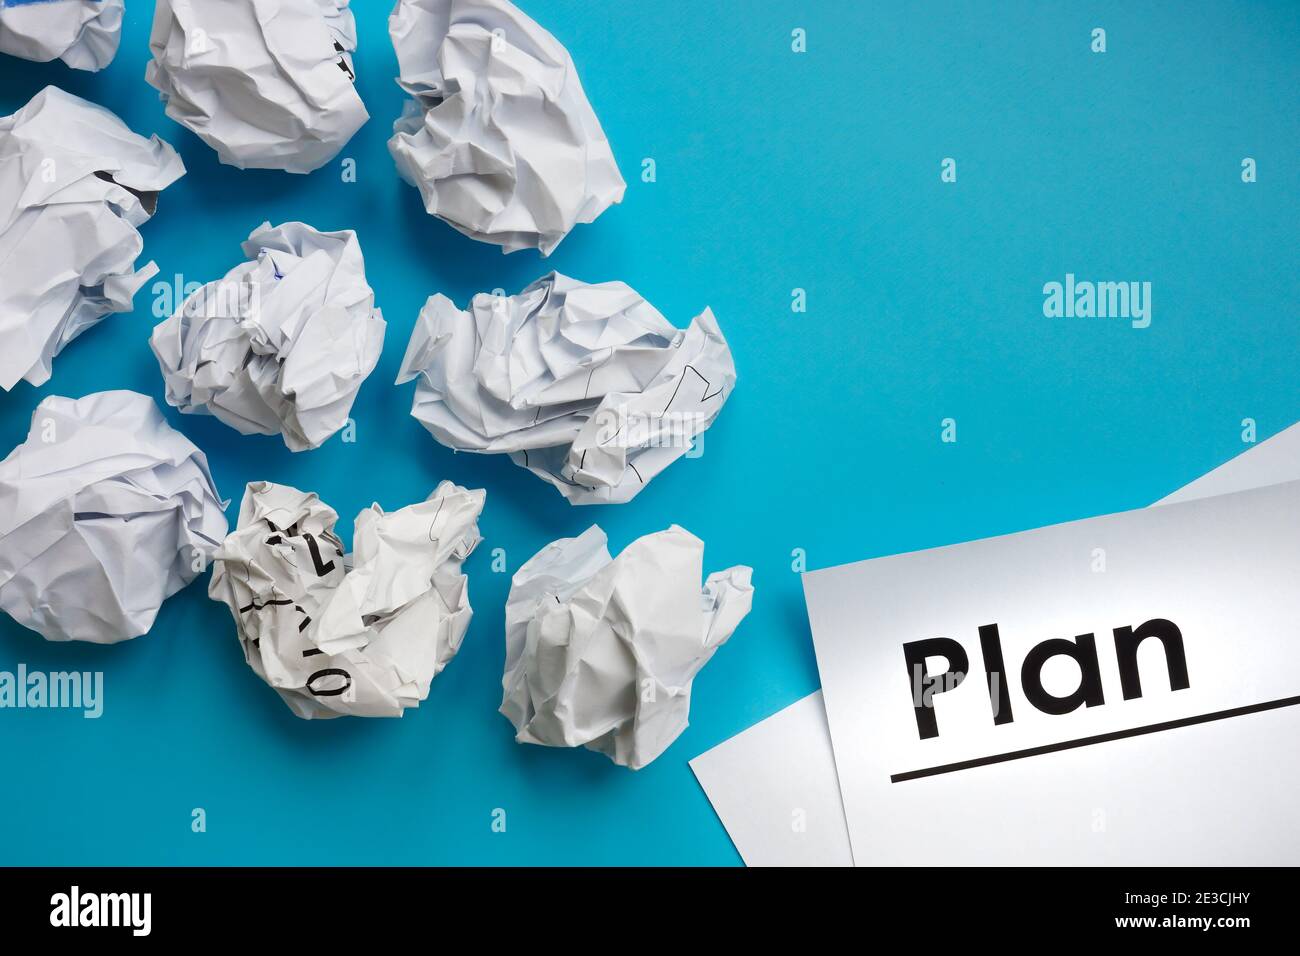 Plan and paper balls as symbol of success and failure. Stock Photo